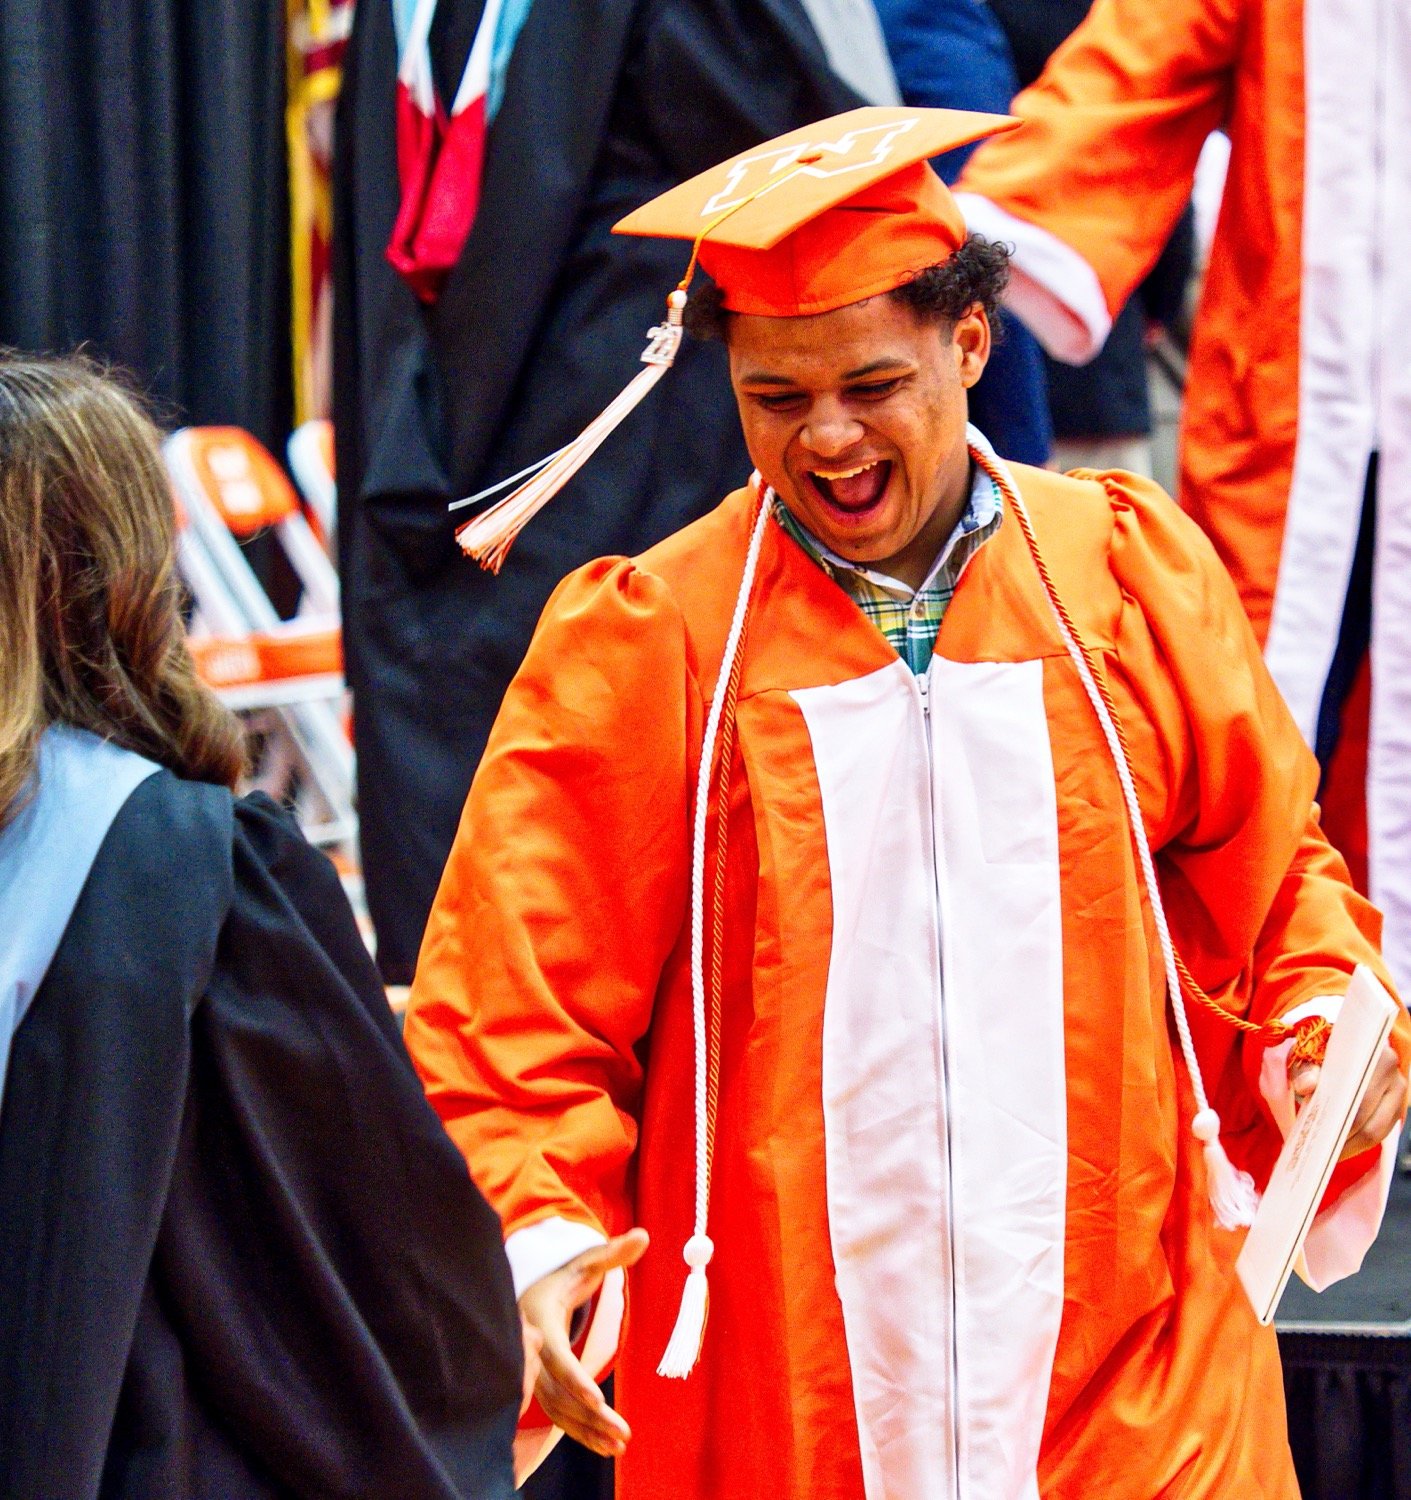 Nate Griffin exuberantly exits the stage after receiving his diploma. [observe more orange, get grad gifts]